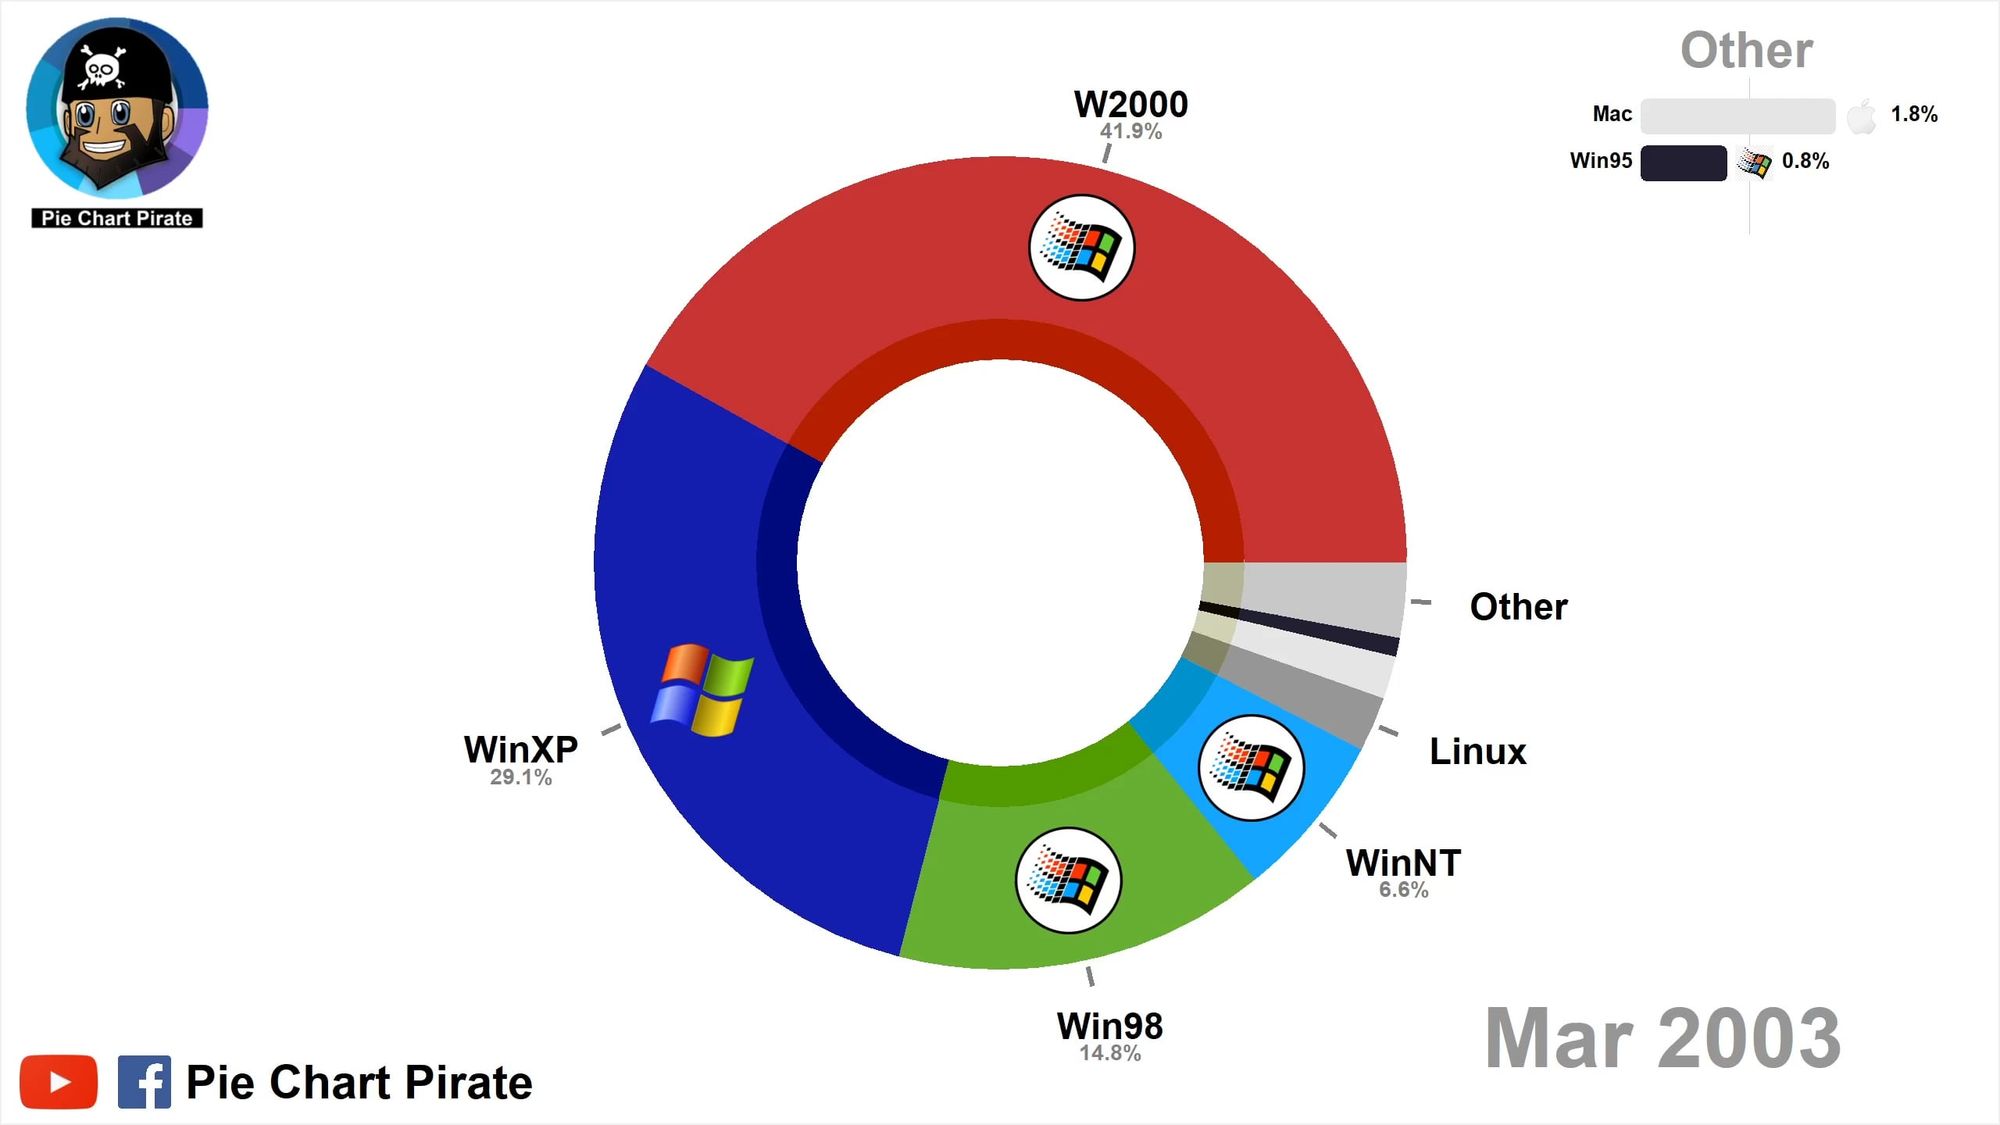 [OC] Laptop and Desktop OS market share between 2003 and 2020